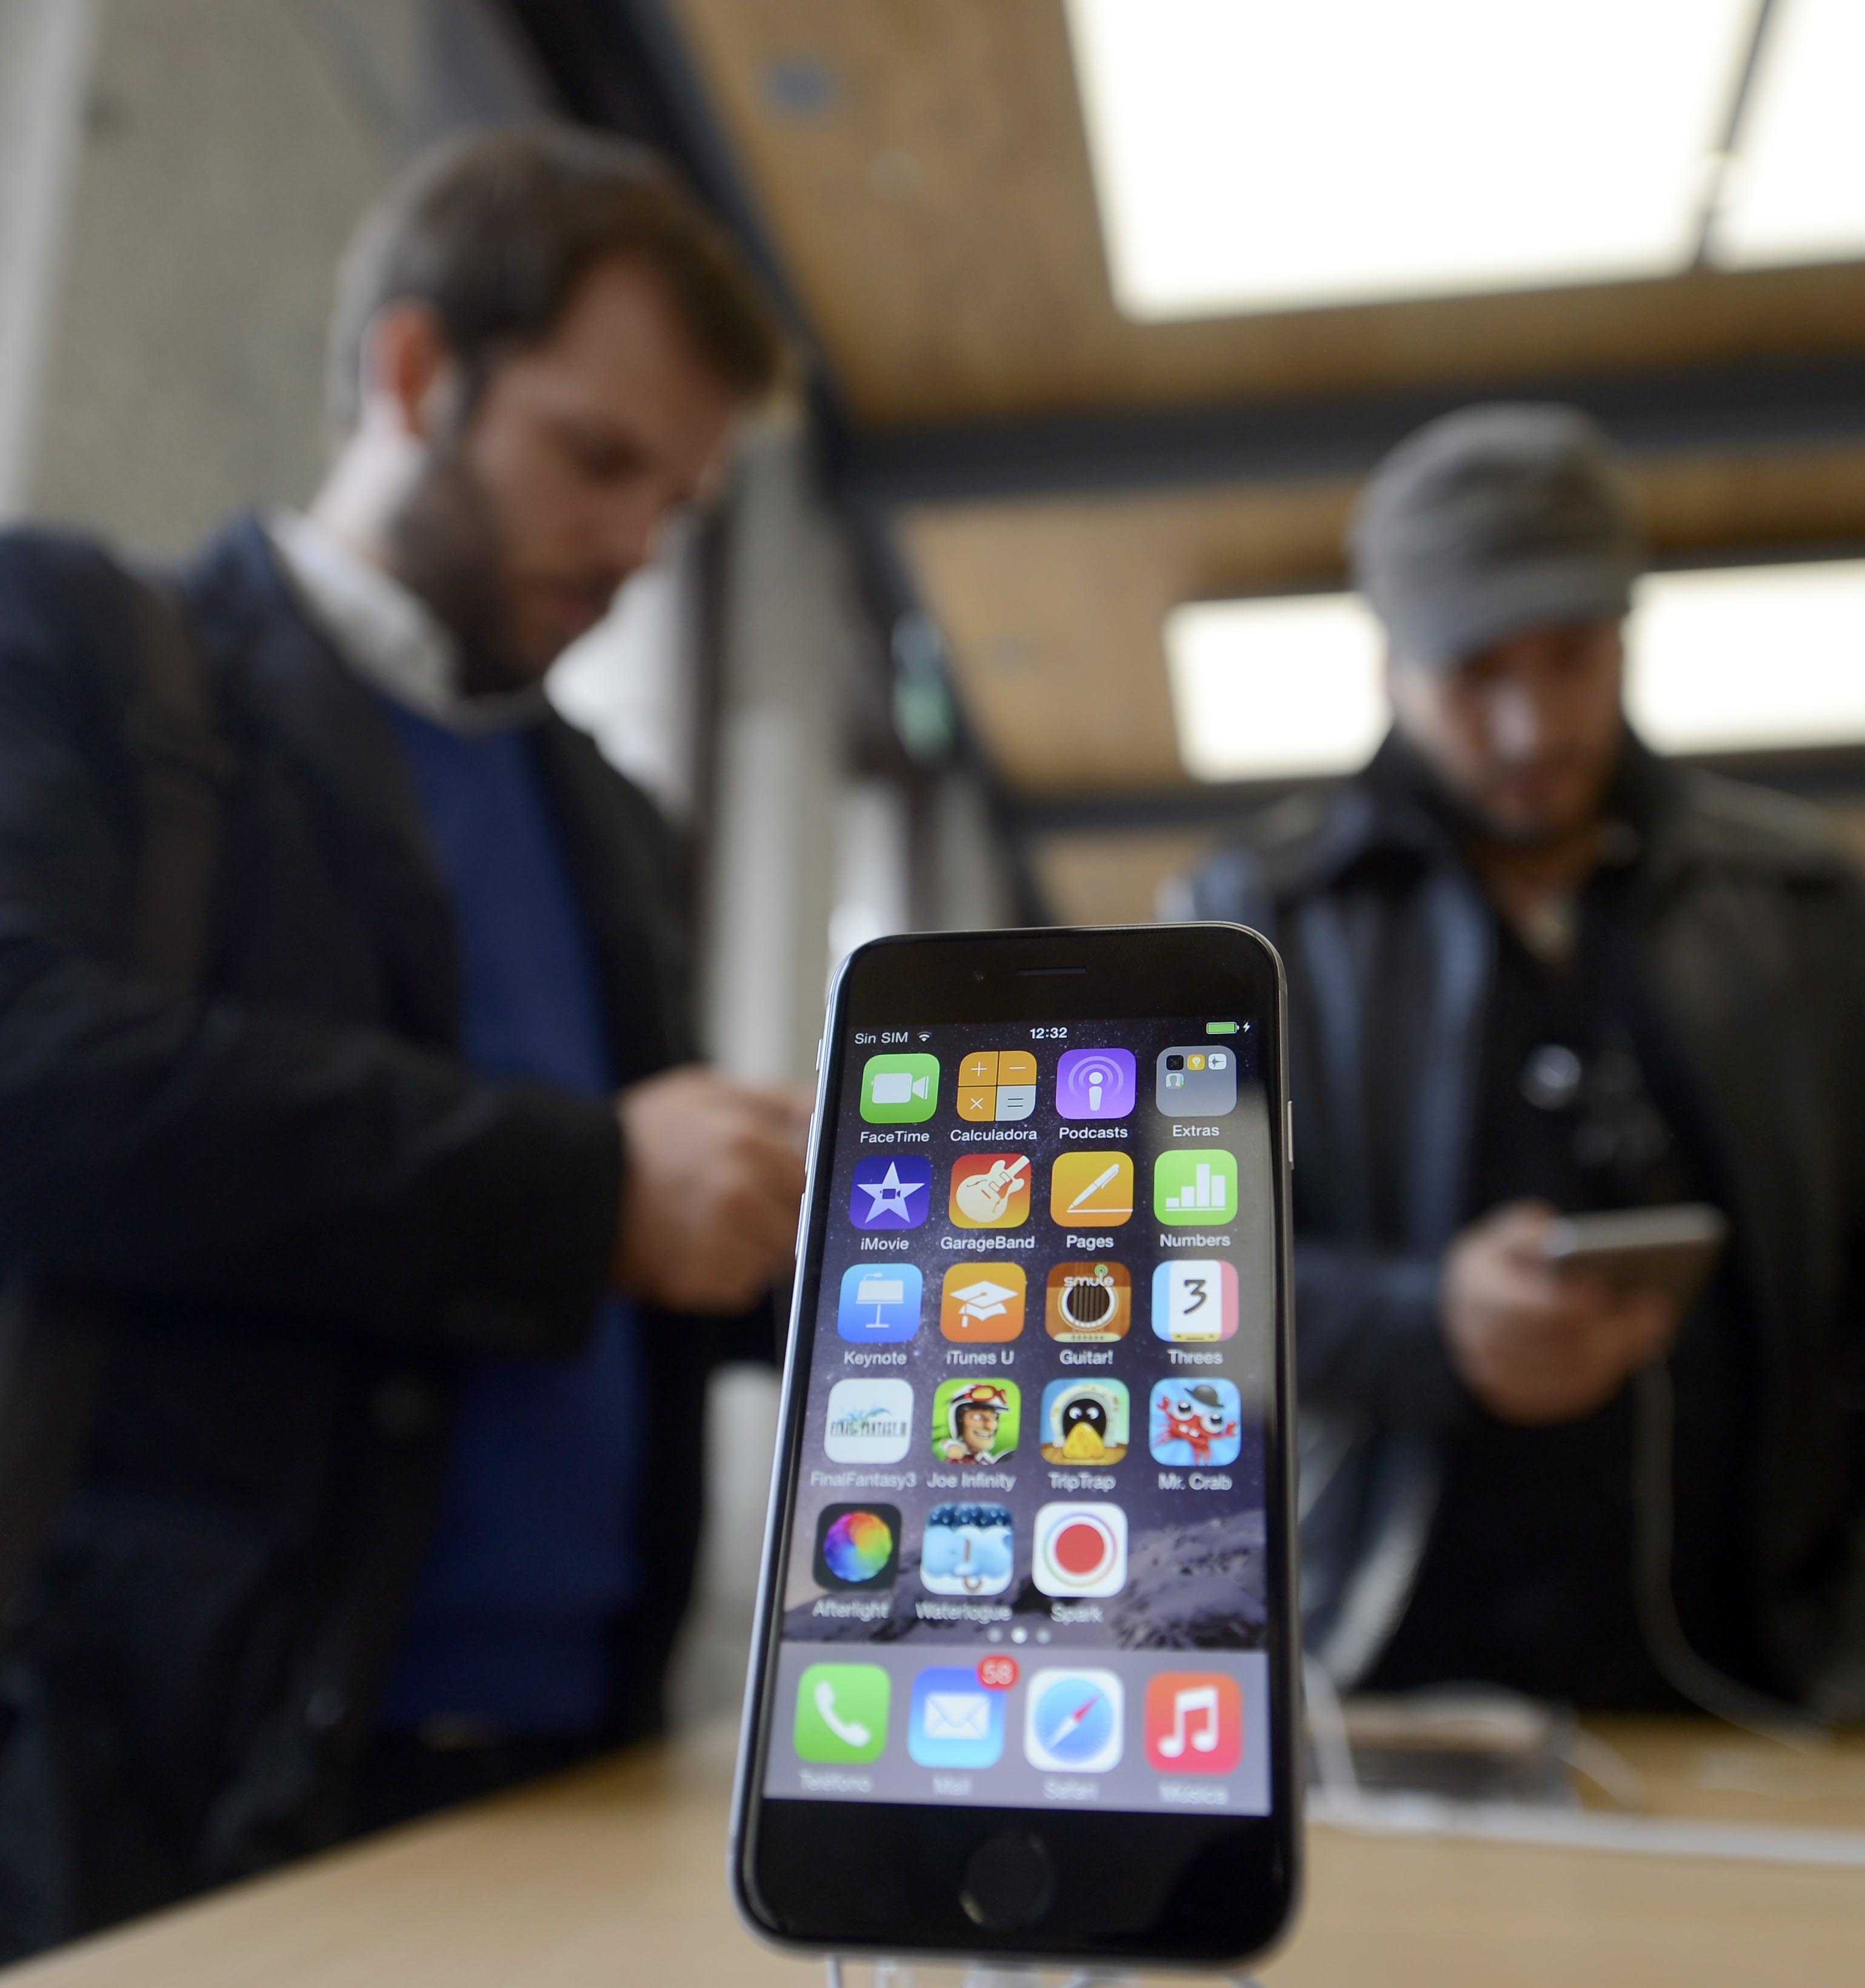 The new product of Apple, iPhone 6 Plus, is on display at an Apple Store in Madrid, Spain, on September 26, 2014. (Anadolu Agency—Getty Images)